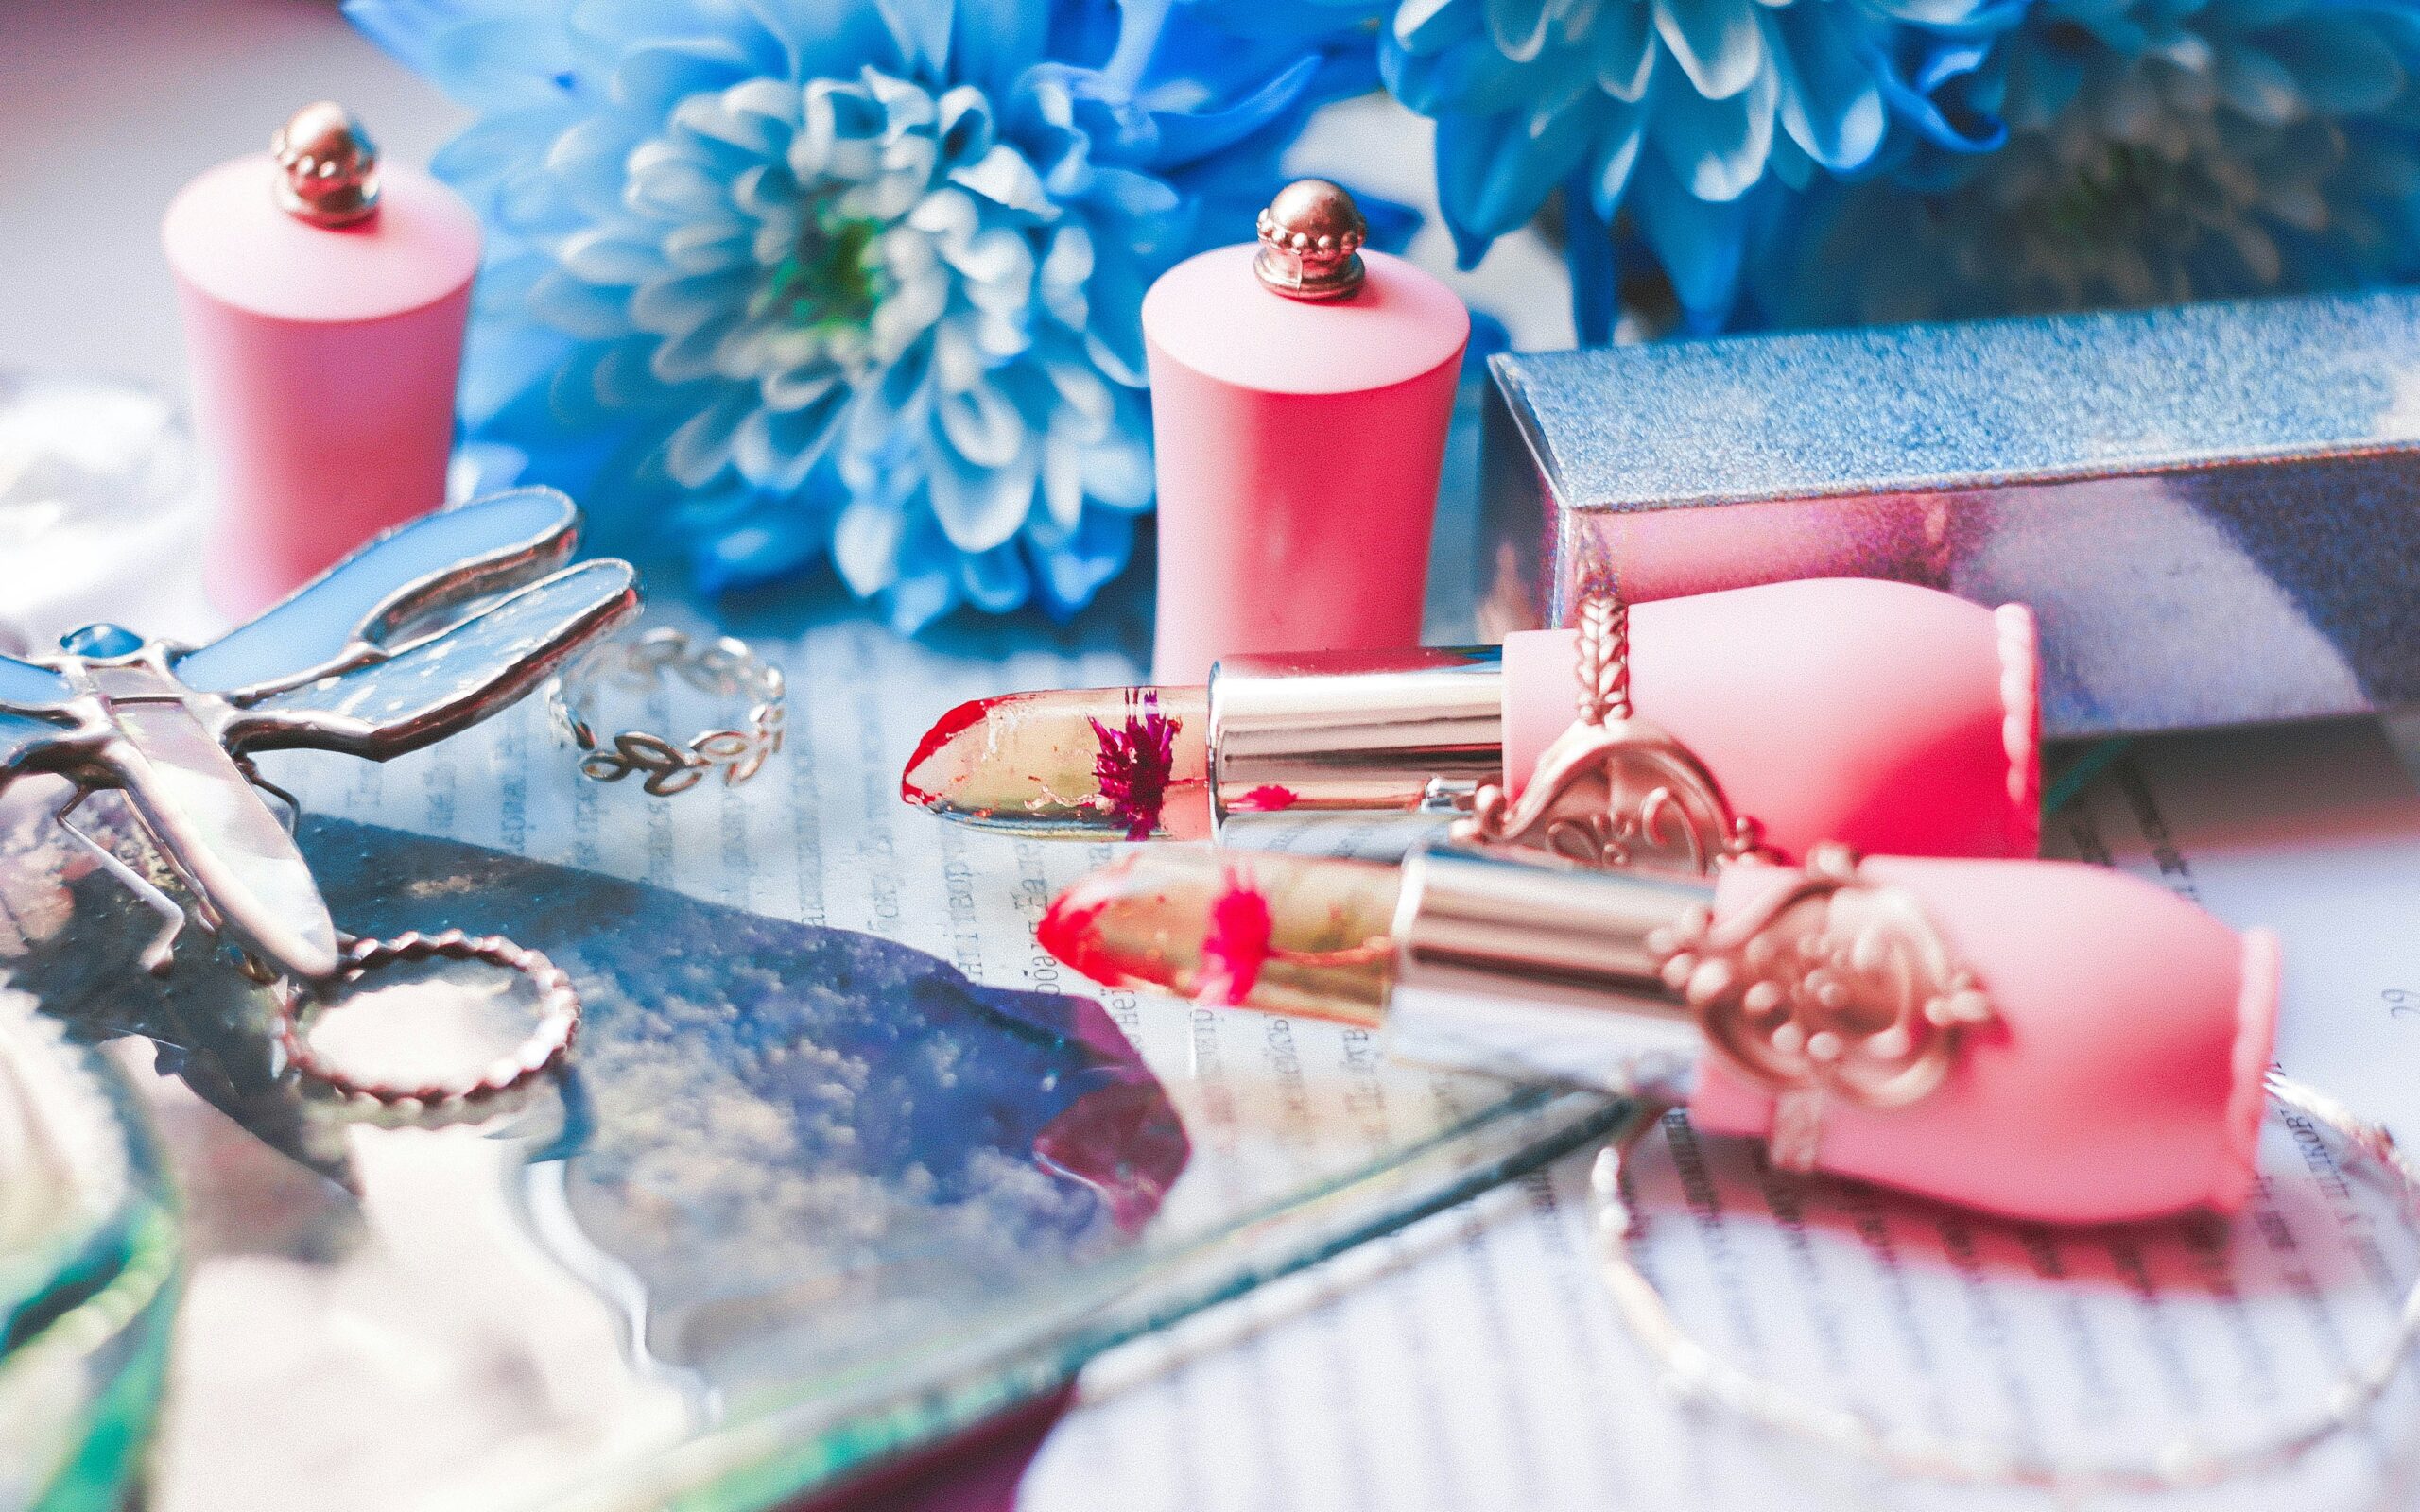 Beauty Essentials: Must-Have Skincare and Makeup for Your Vanity